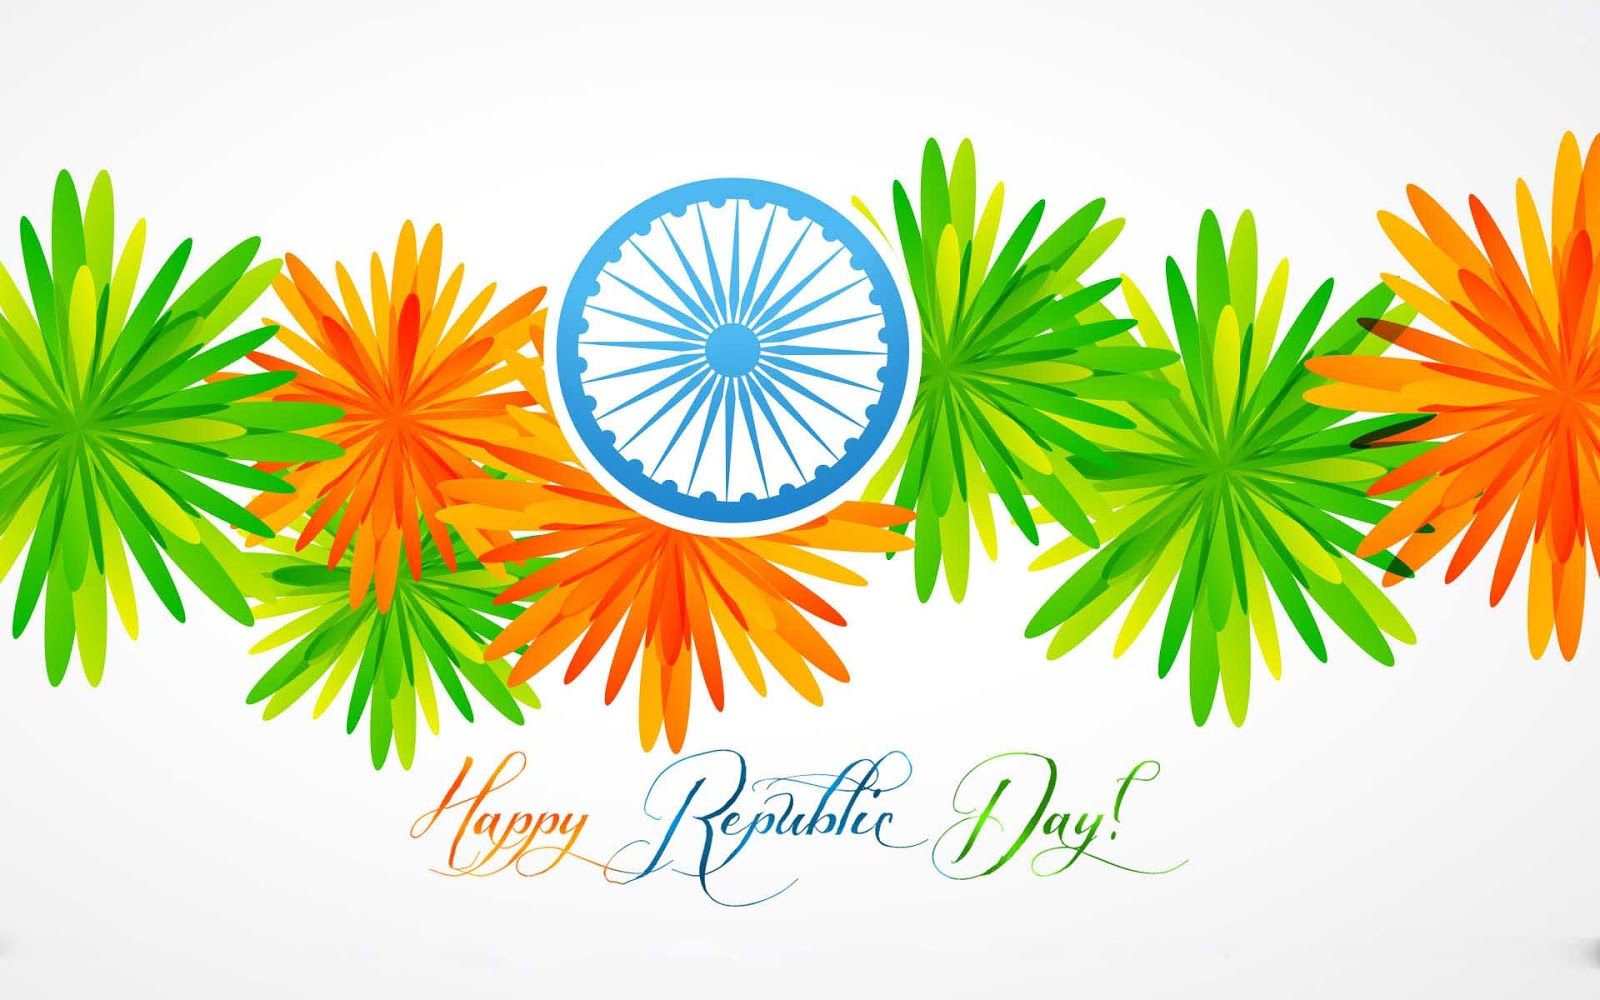 Happy Republic Day 2021 Wallpapers - Wallpaper Cave